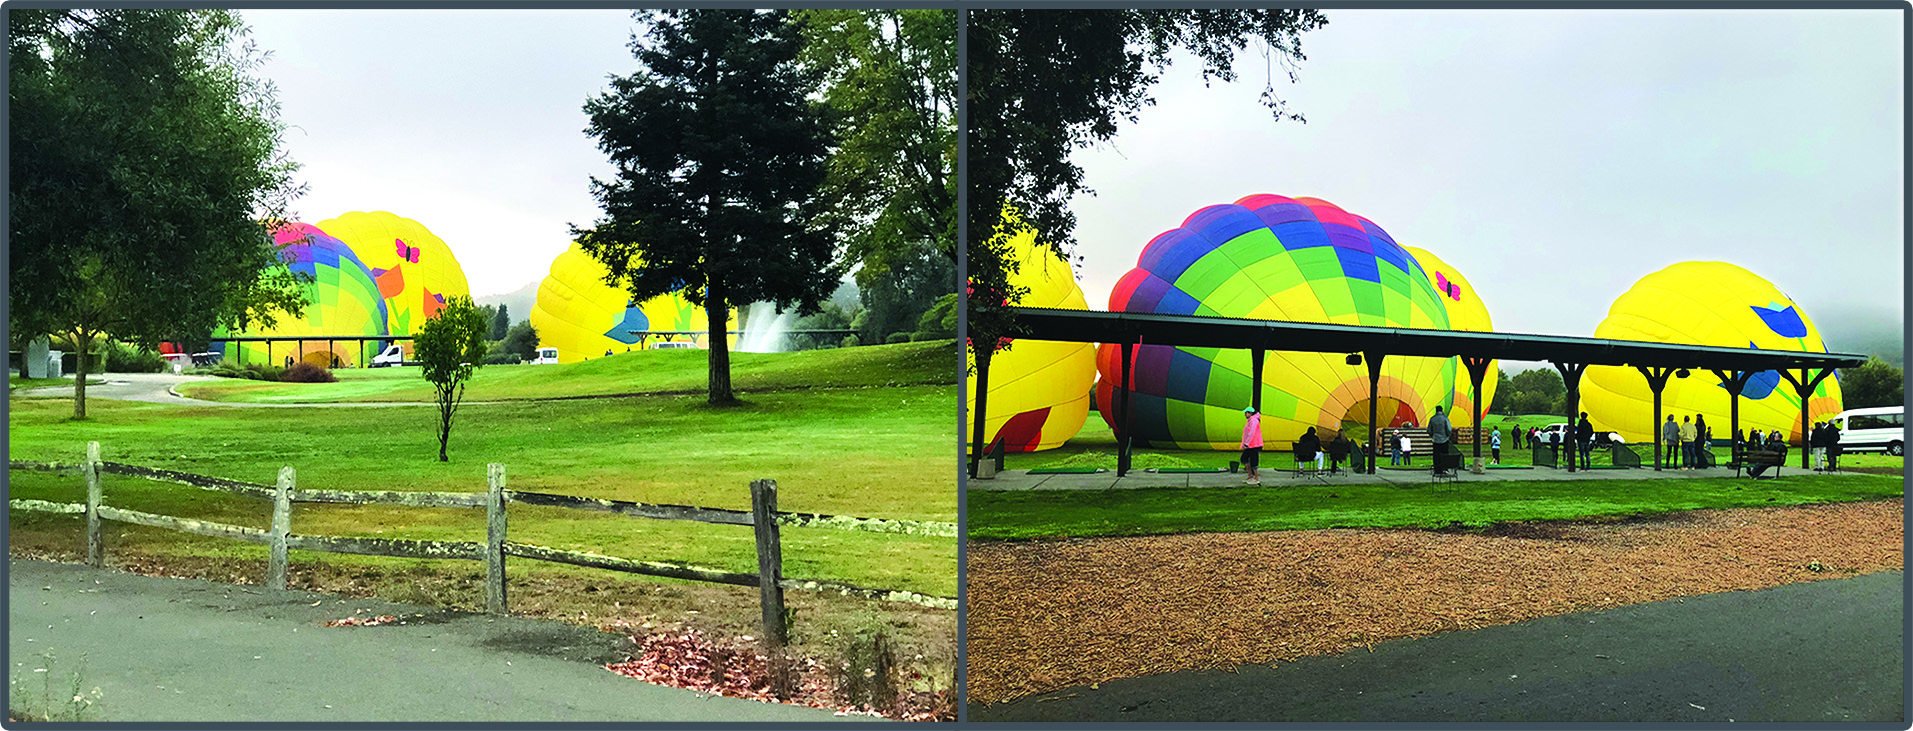 Two photographs of hot air balloons being launched from the golf course.